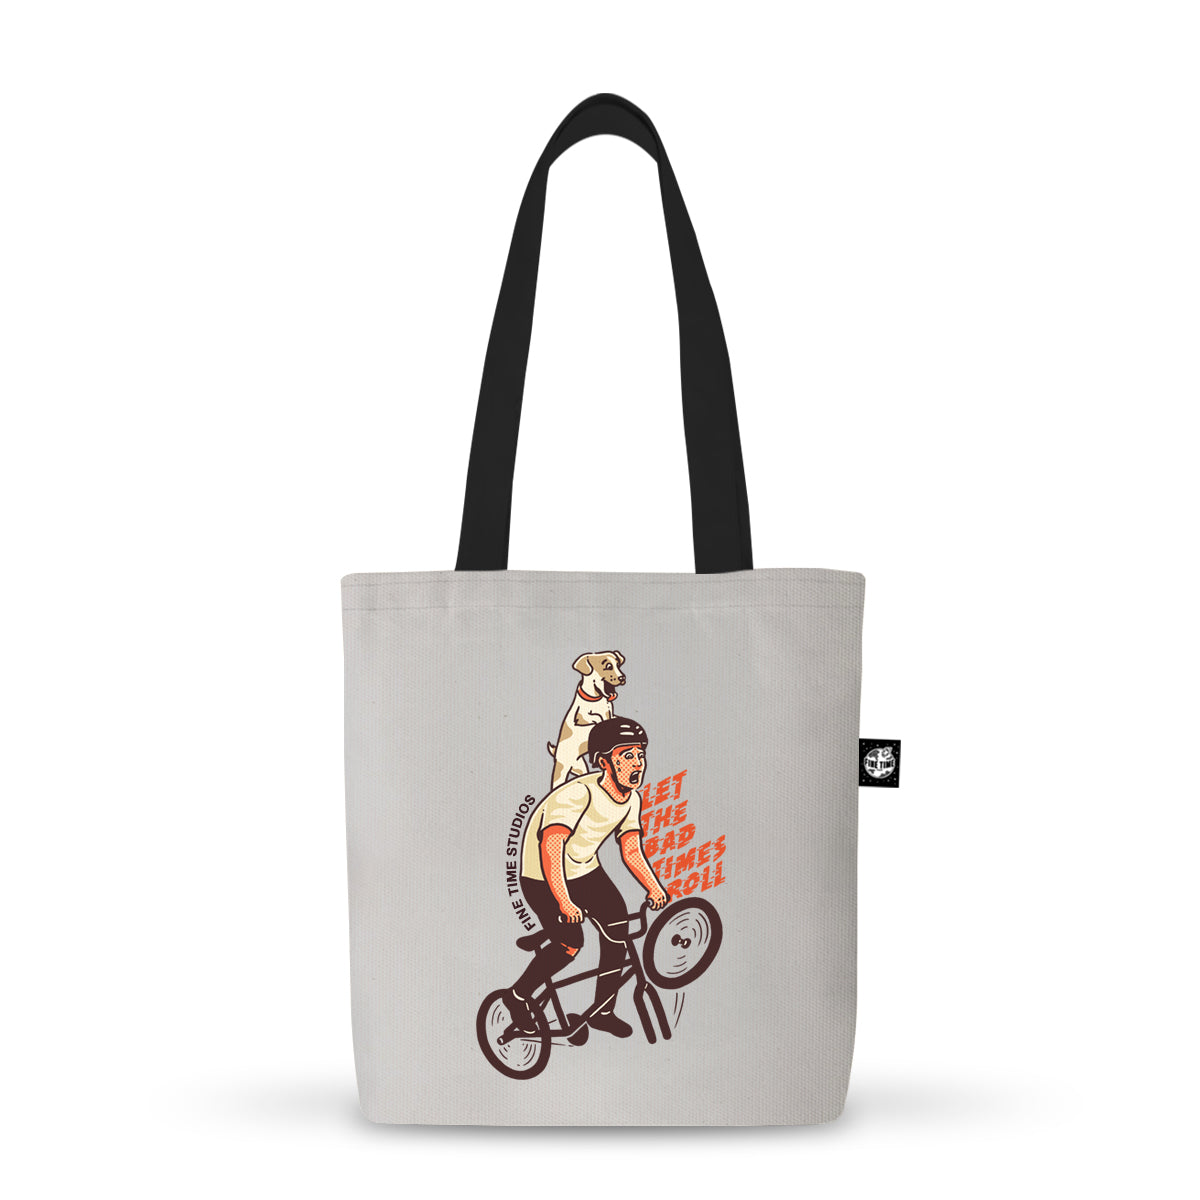 Let the Bad Times Roll Tote Bag